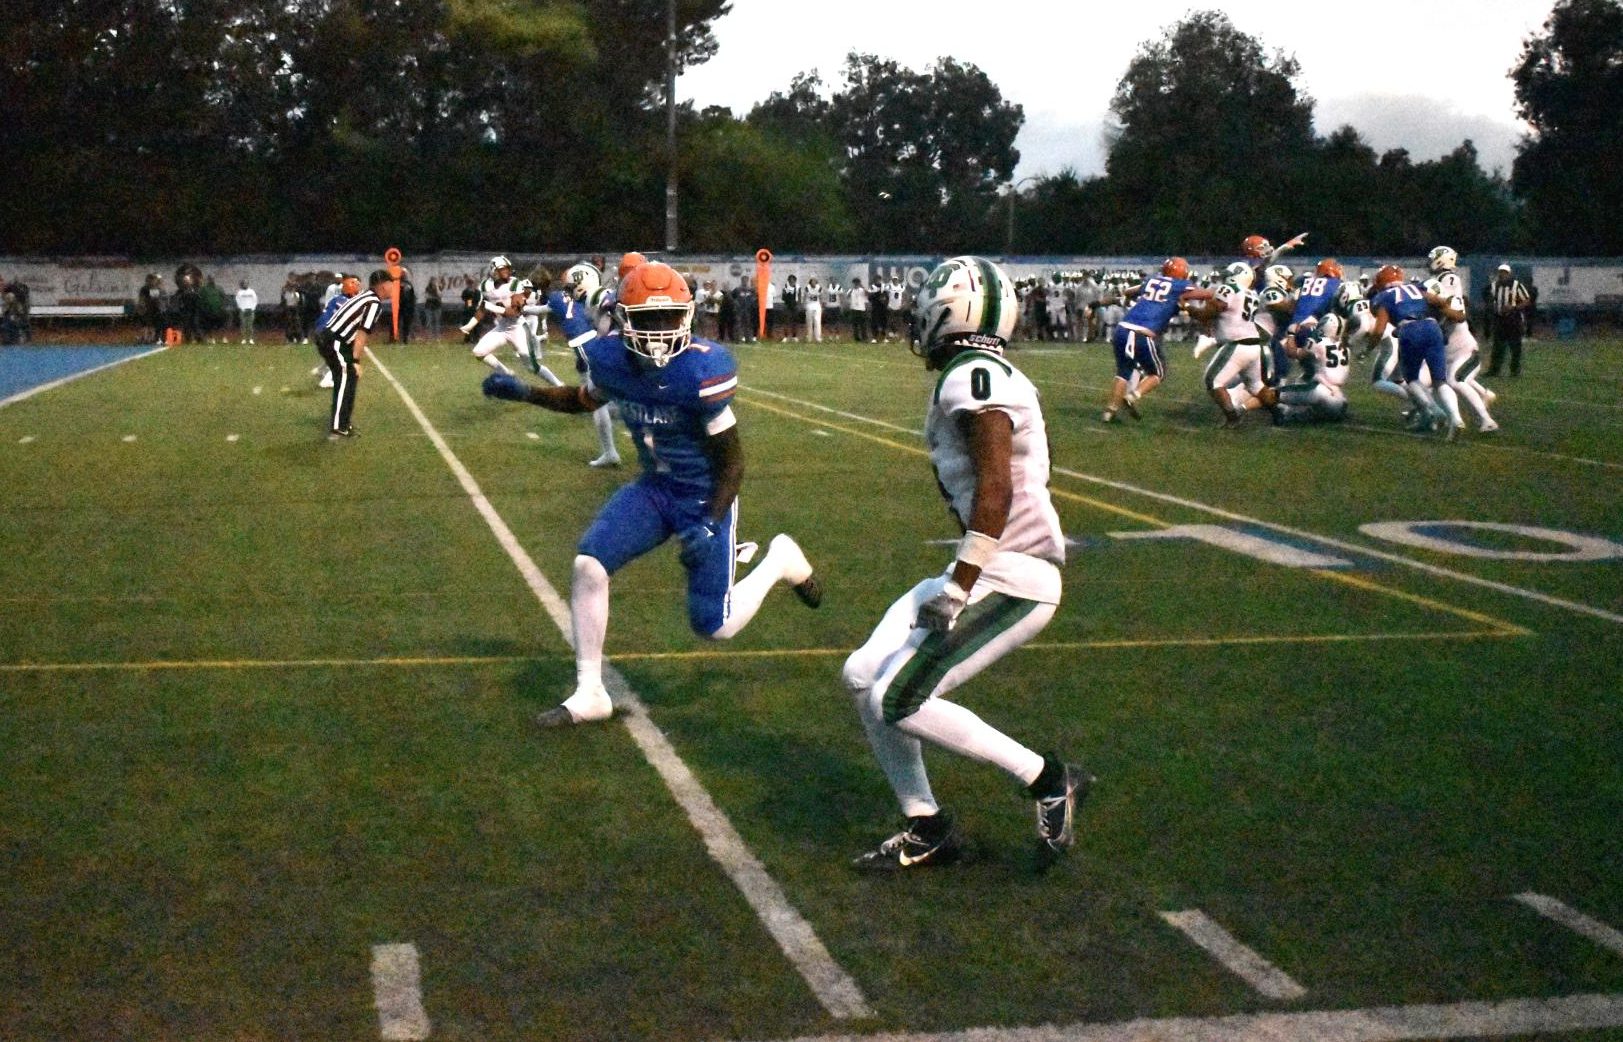 FACING OFF: WHS senior running back Ife Orekoya ‘24 battles against Thousand Oaks’ Silas Kemp  as TOHS fights their way into the endzone. The game, on Sept. 1, ended in a TOHS defeat over WHS in a 27-3 win. 